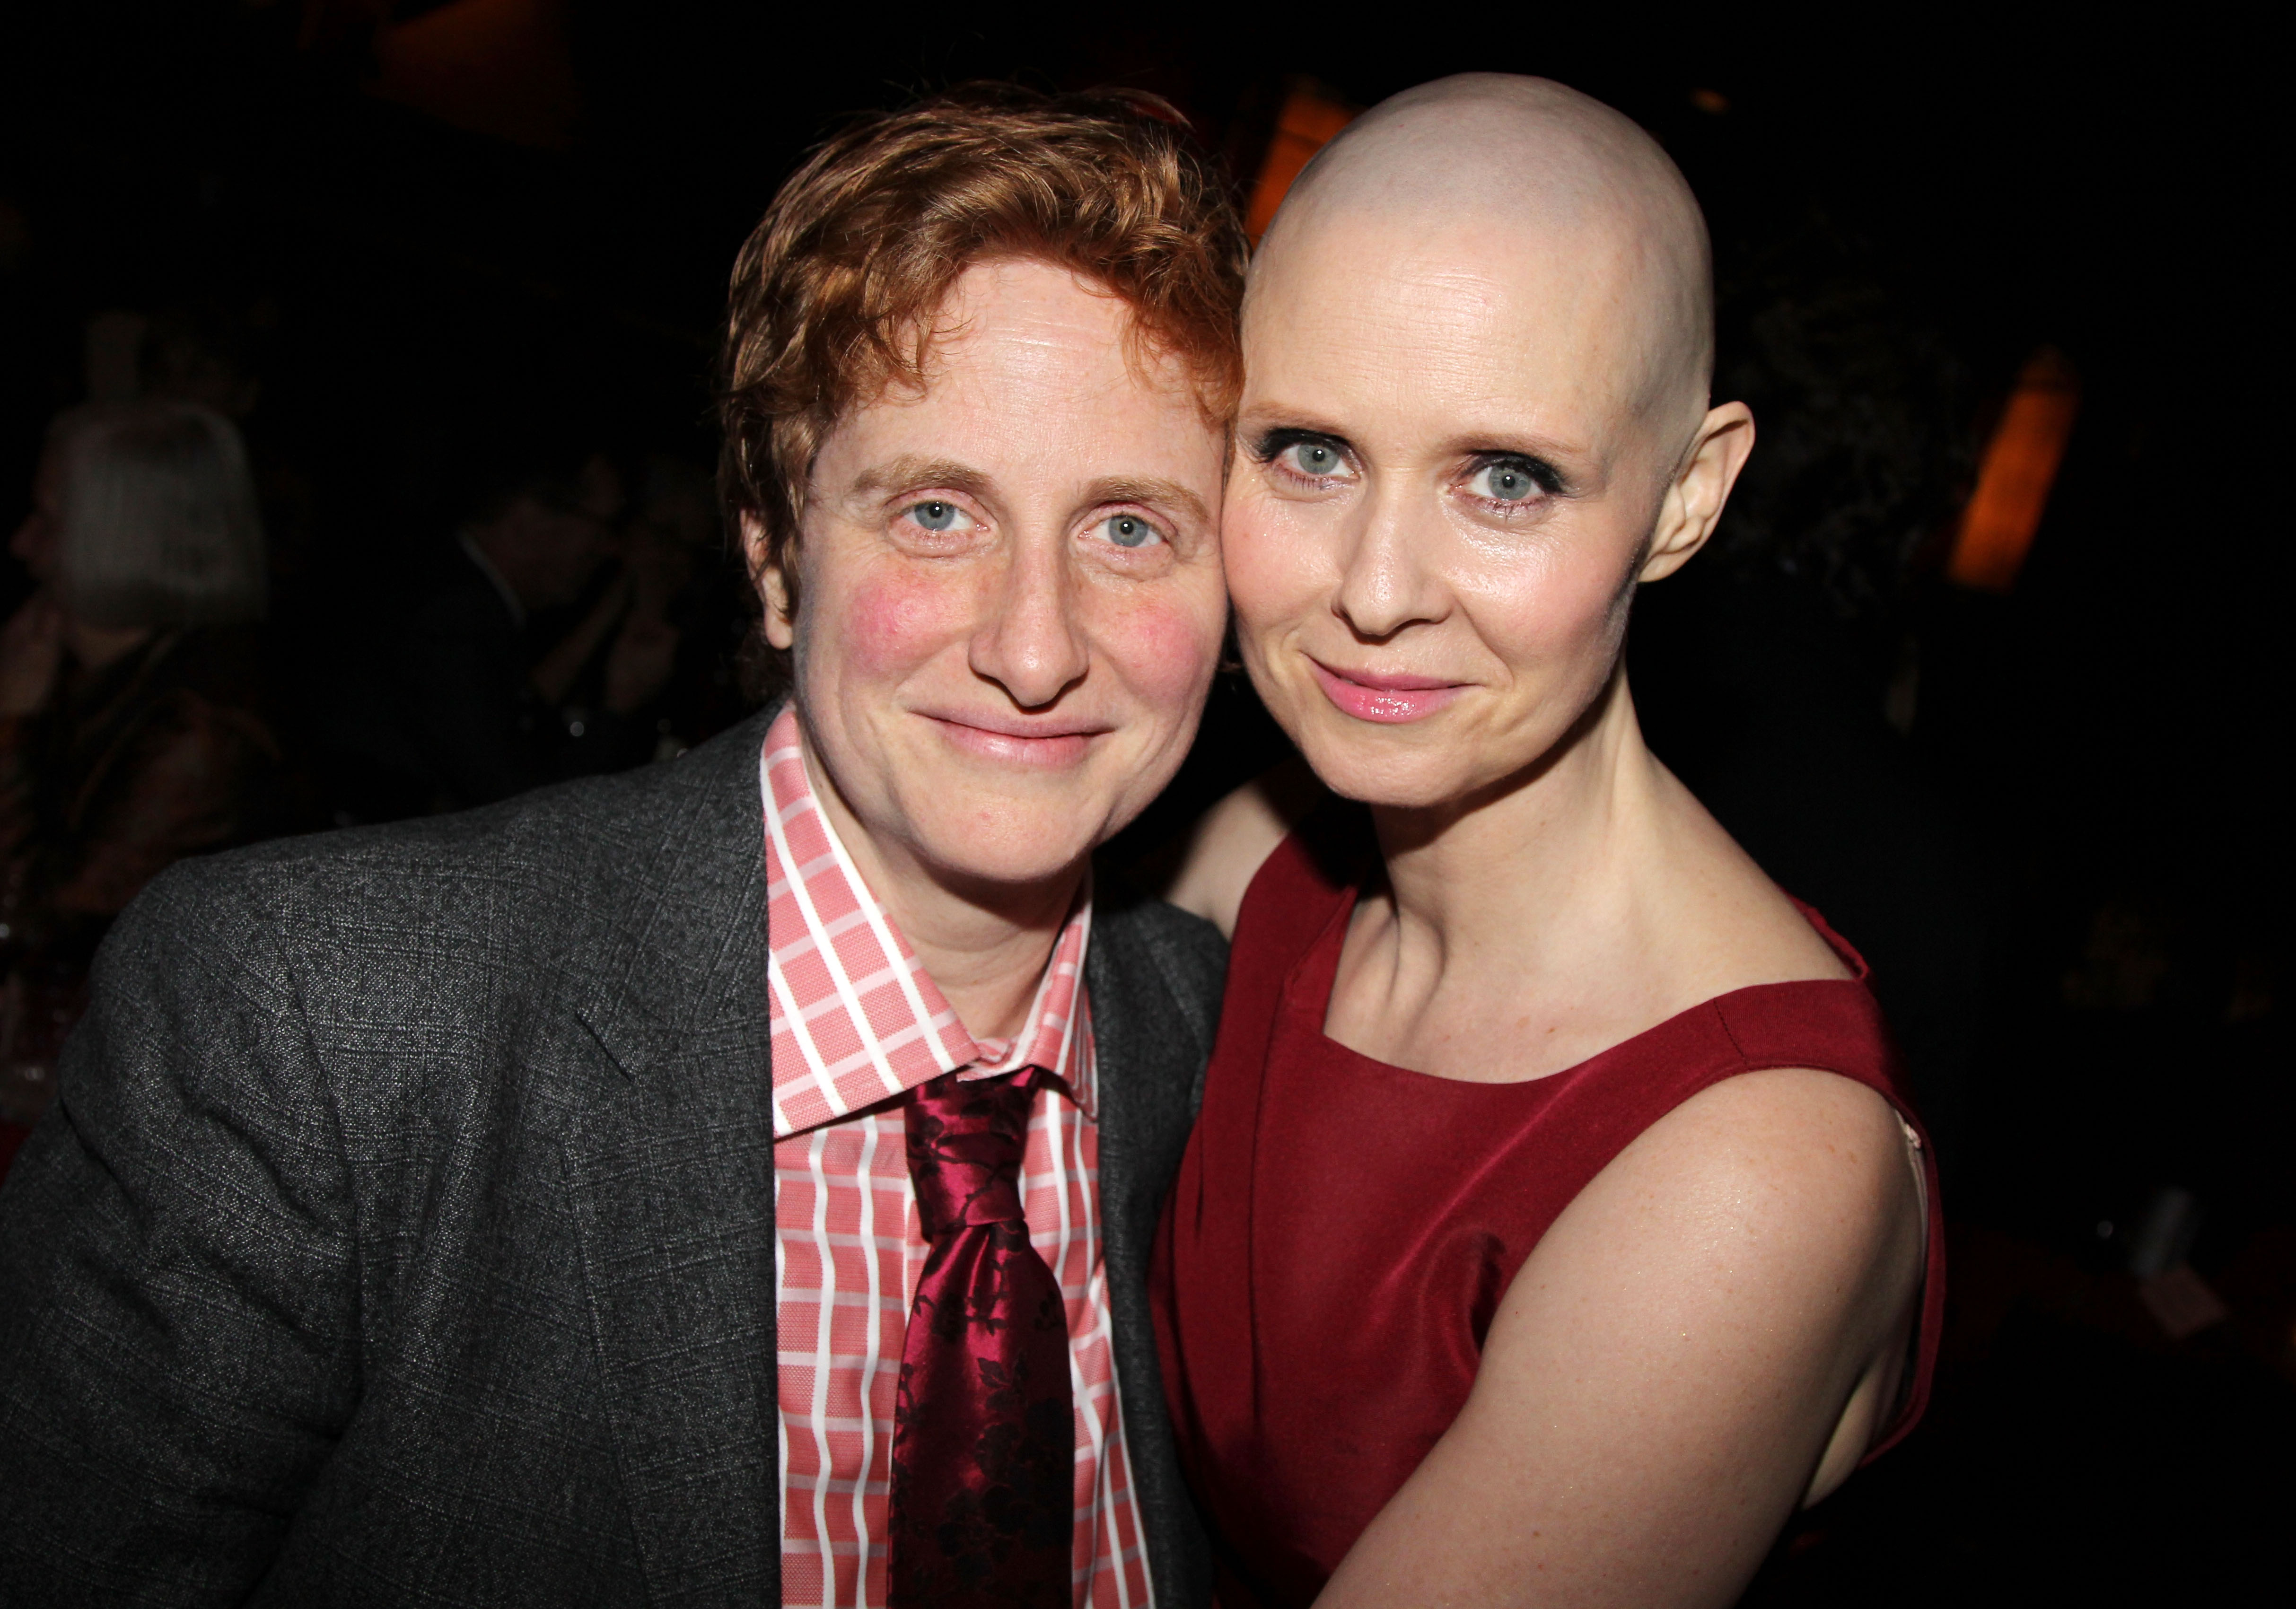 Christine Marinoni and her partner Cynthia Nixon on January 26, 2012, in New York City. | Source: Getty Images